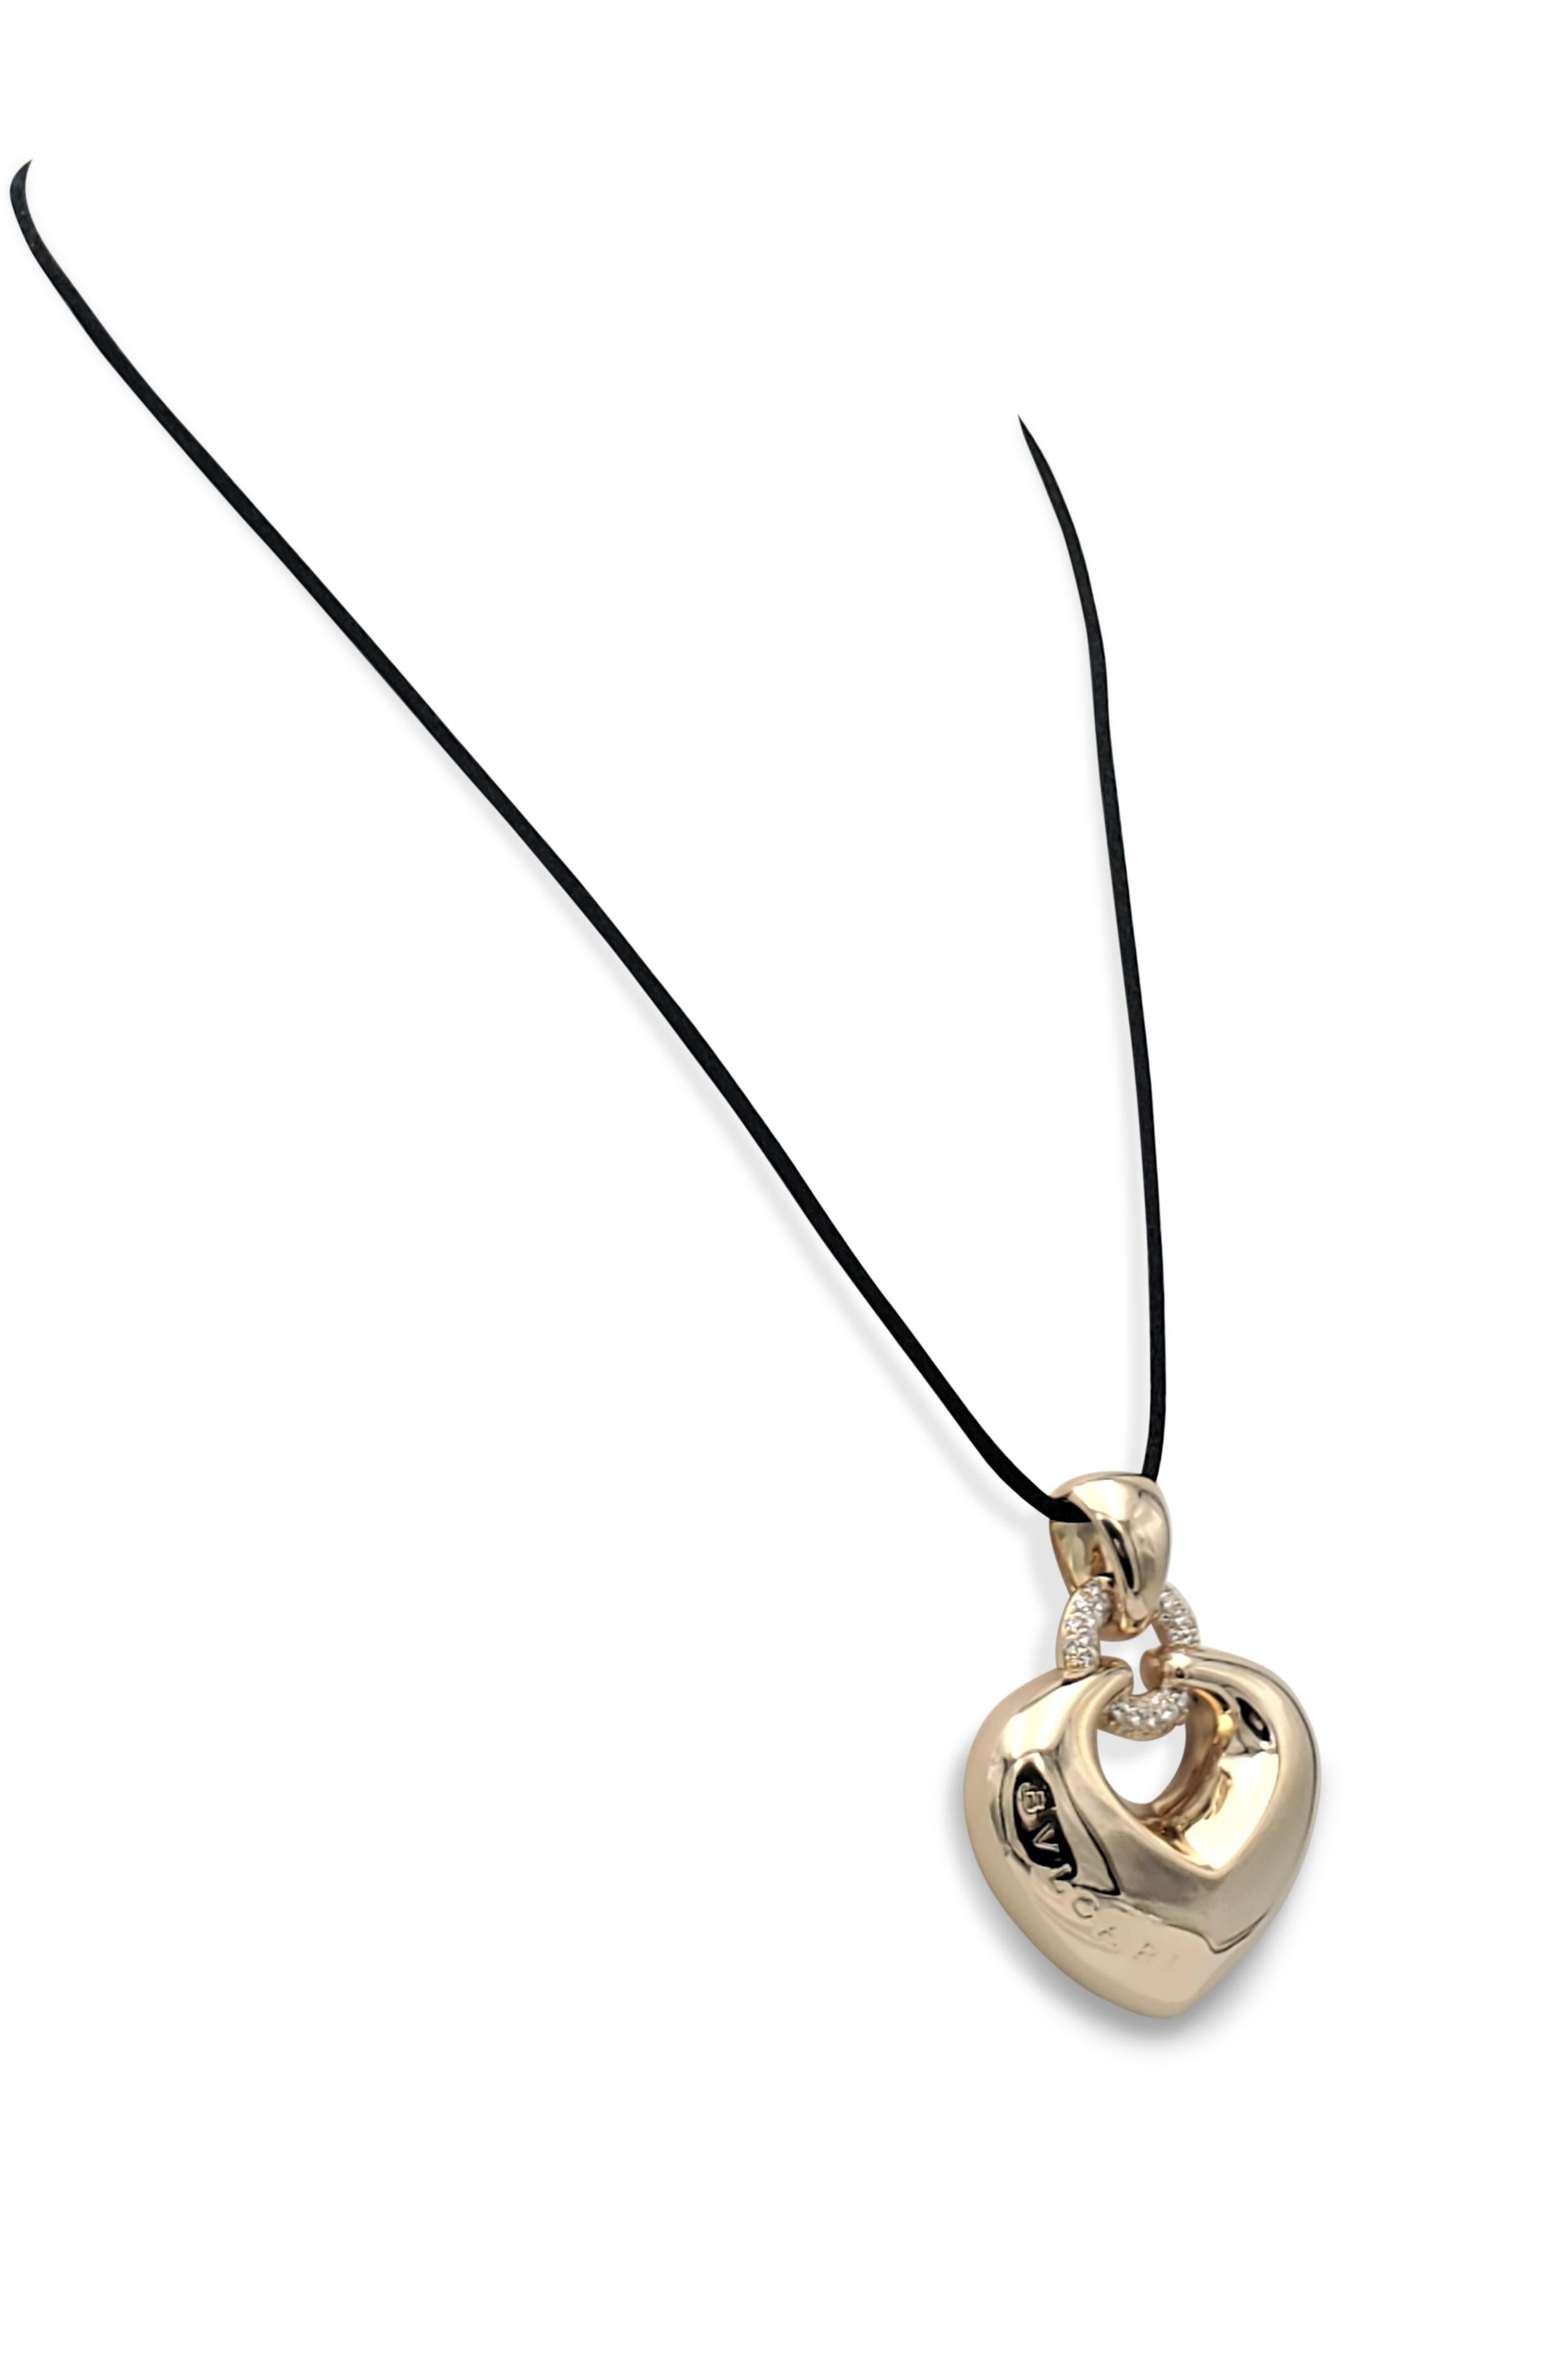 Authentic Bulgari puffed heart pendant from the 'Doppio Cuore' collection is crafted in 18 karat yellow gold and set with an estimated 0.60 carats of high-quality round brilliant cut diamonds. The pendant hangs from a silk cord that is not original